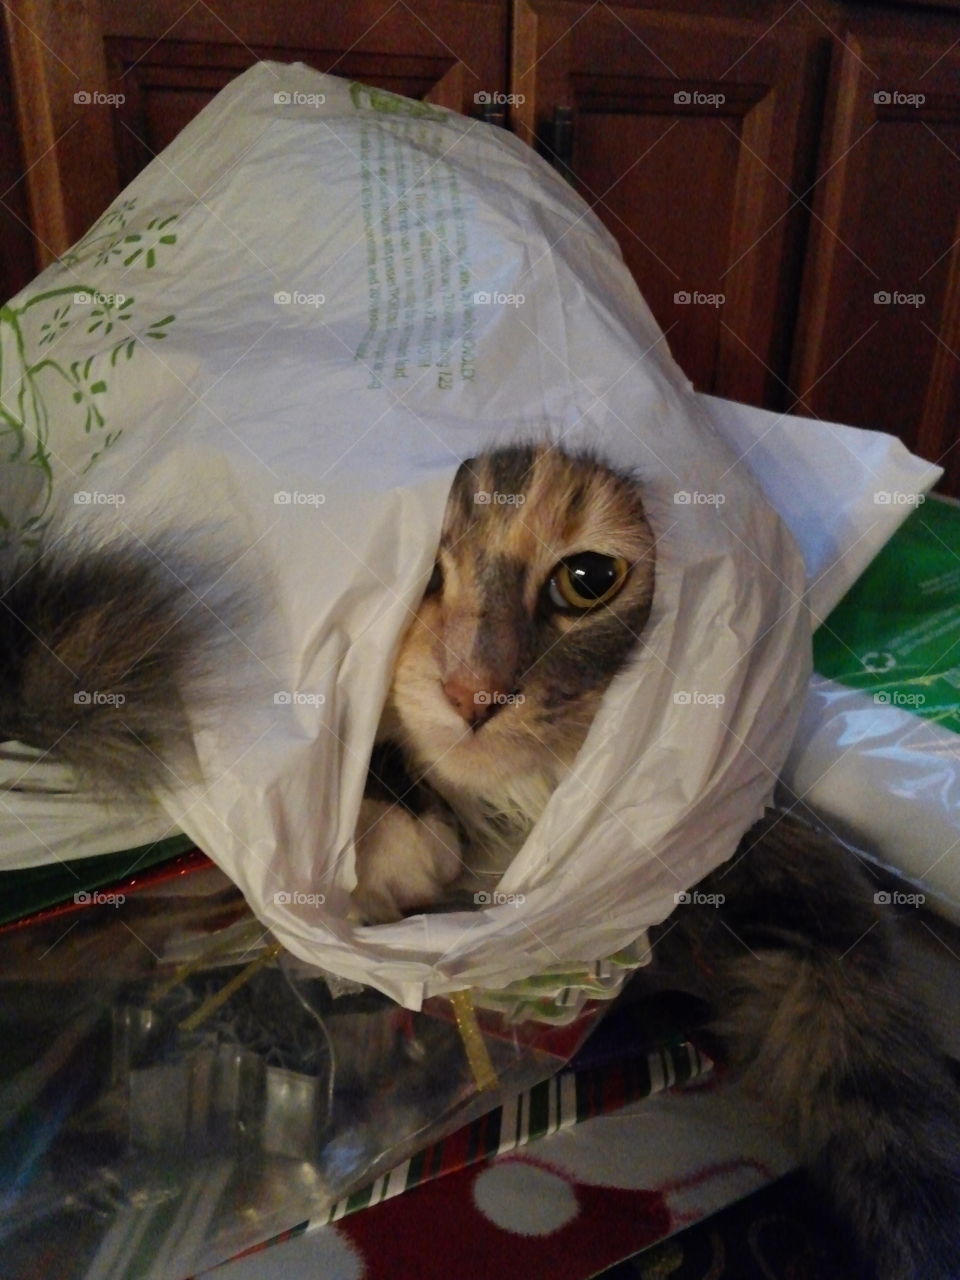 Don't let the cat out of the bag!